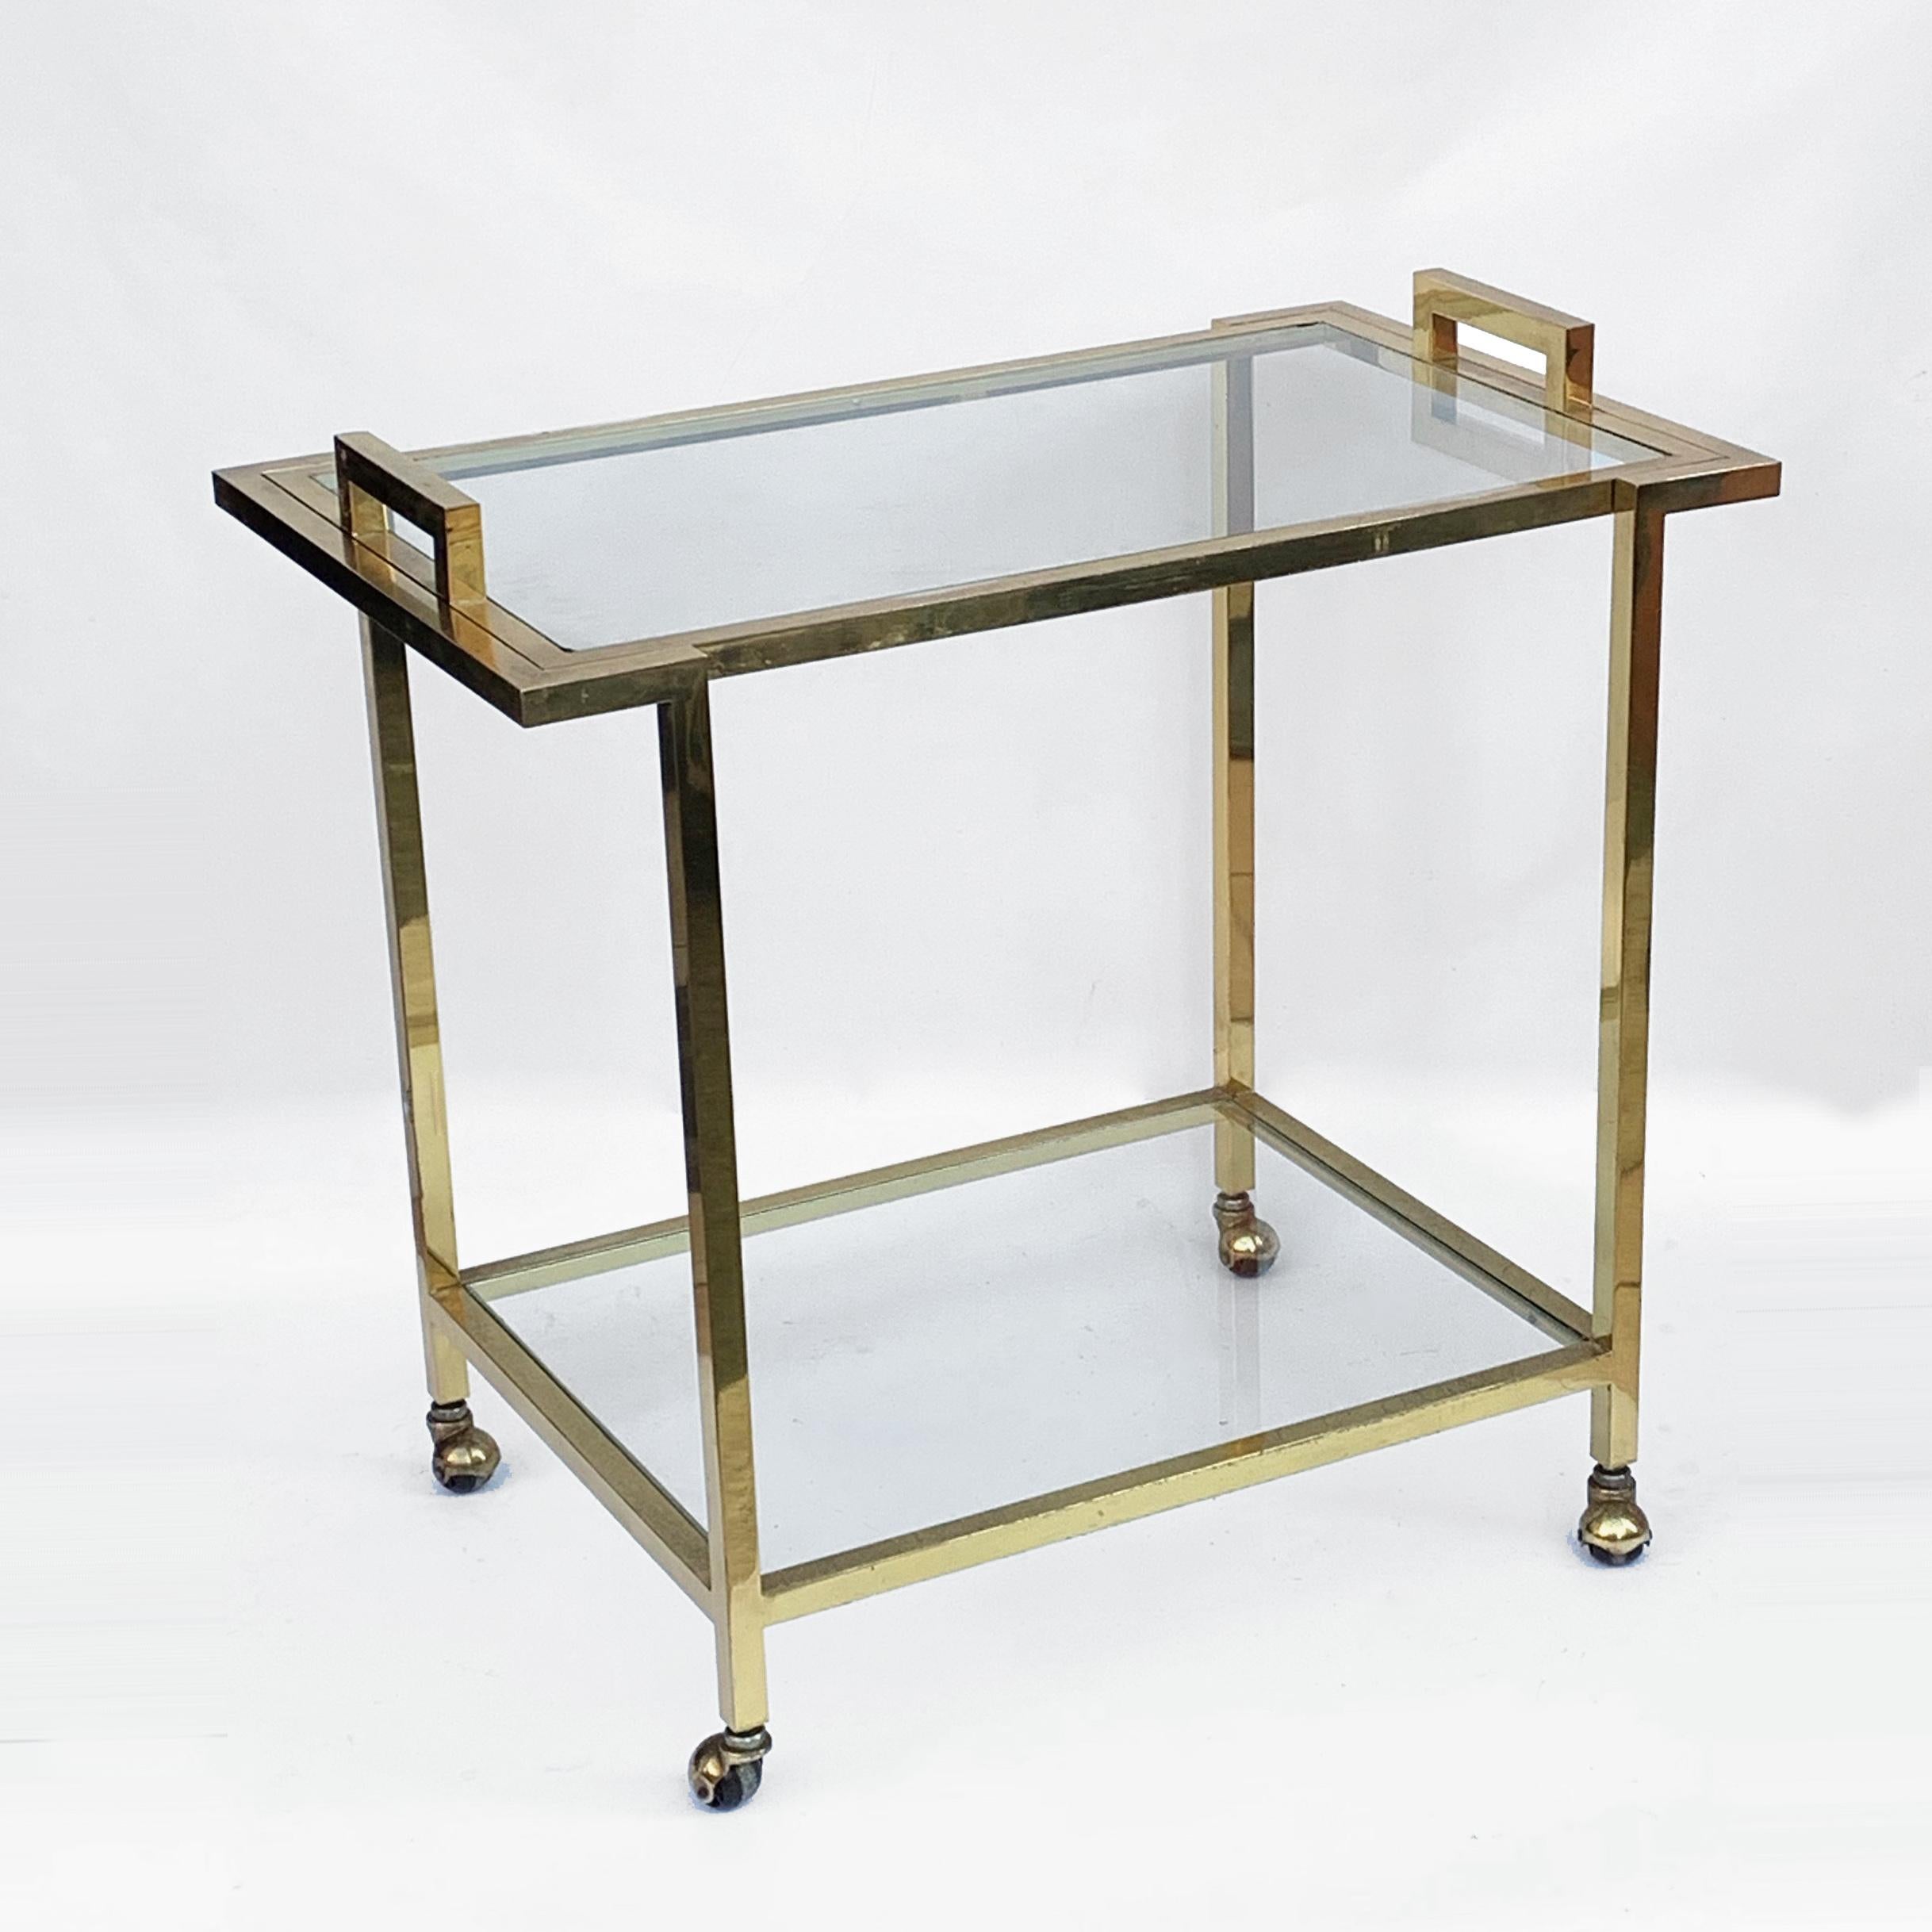 Romeo Rega style Trolley with Service Tray, Gilded Brass and Glass, Italy, 1980s For Sale 3